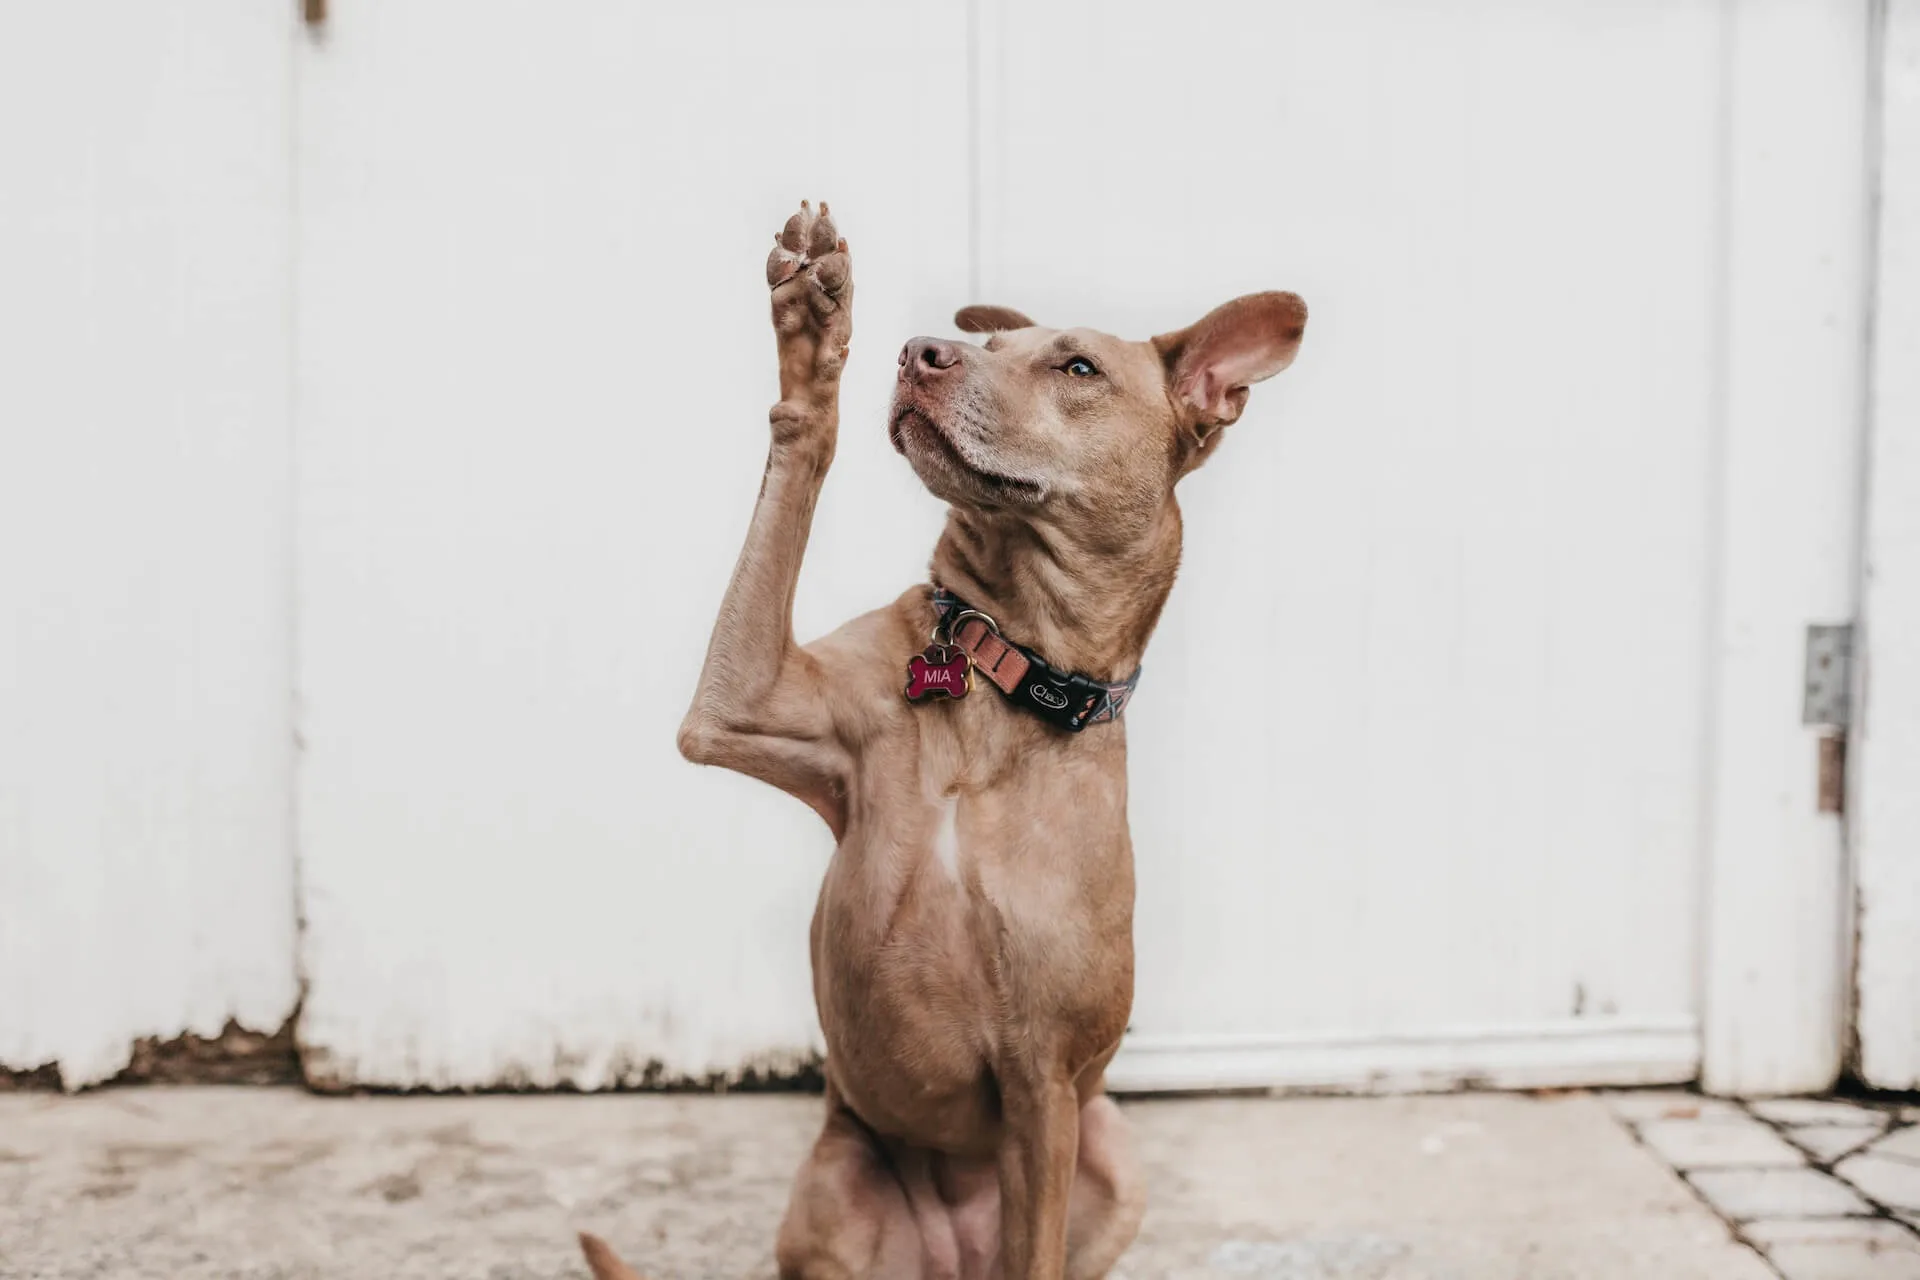 A dog with its hand raised representing the funny things kids say to teachers in class.